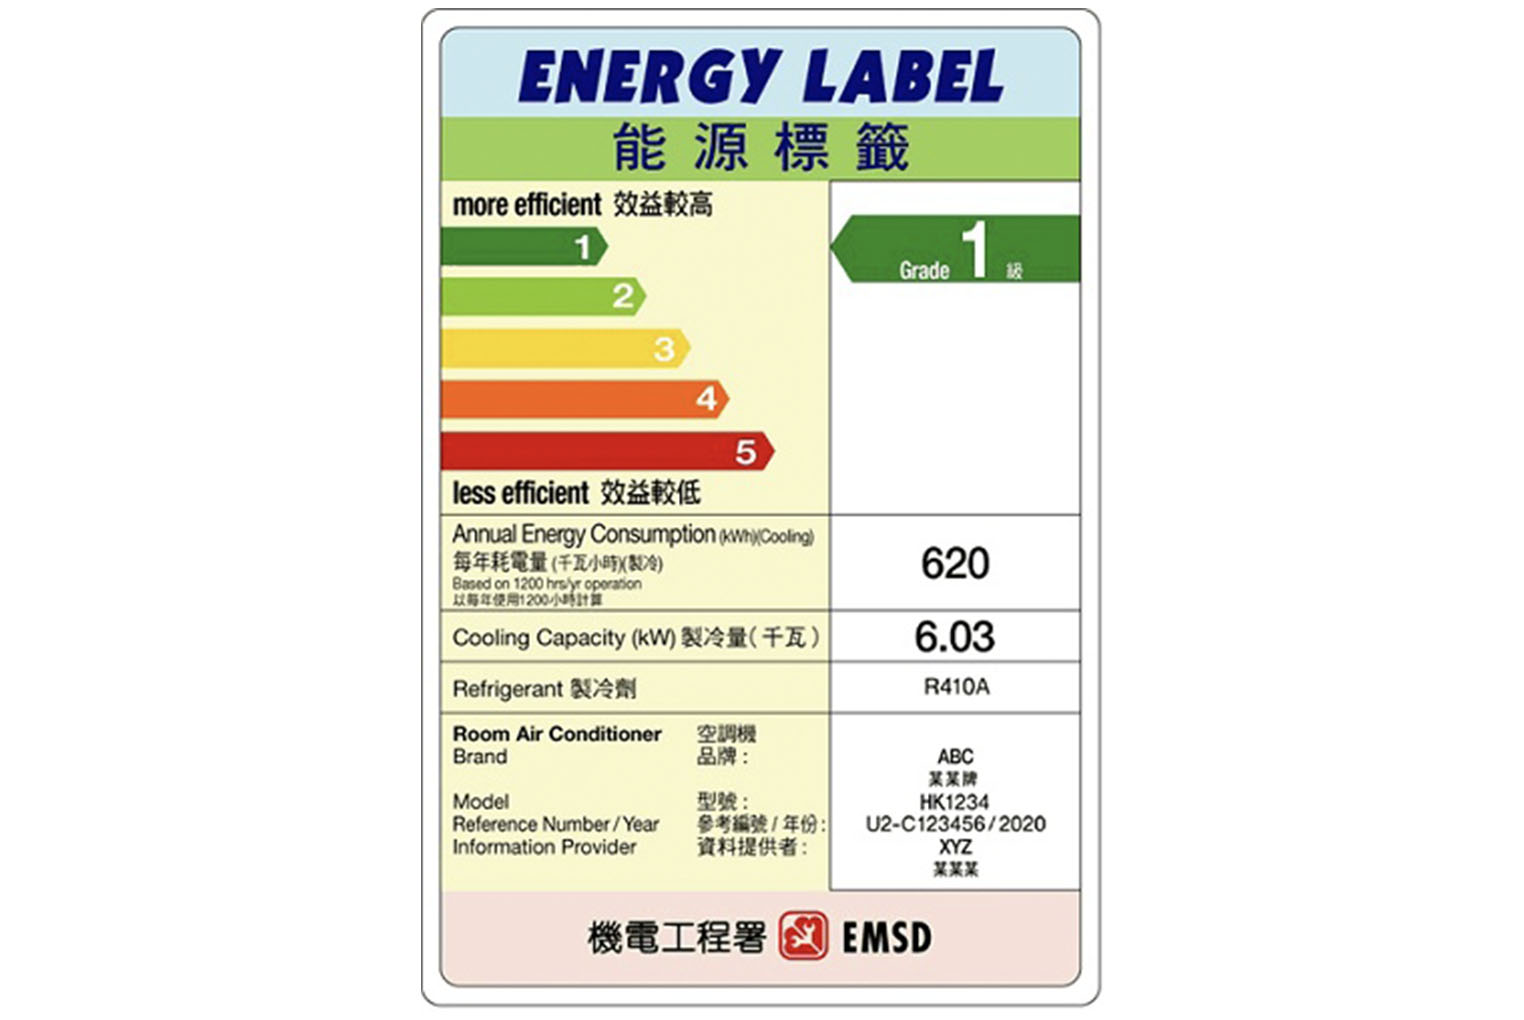 Electrical Appliances with Grade 1 Energy Label